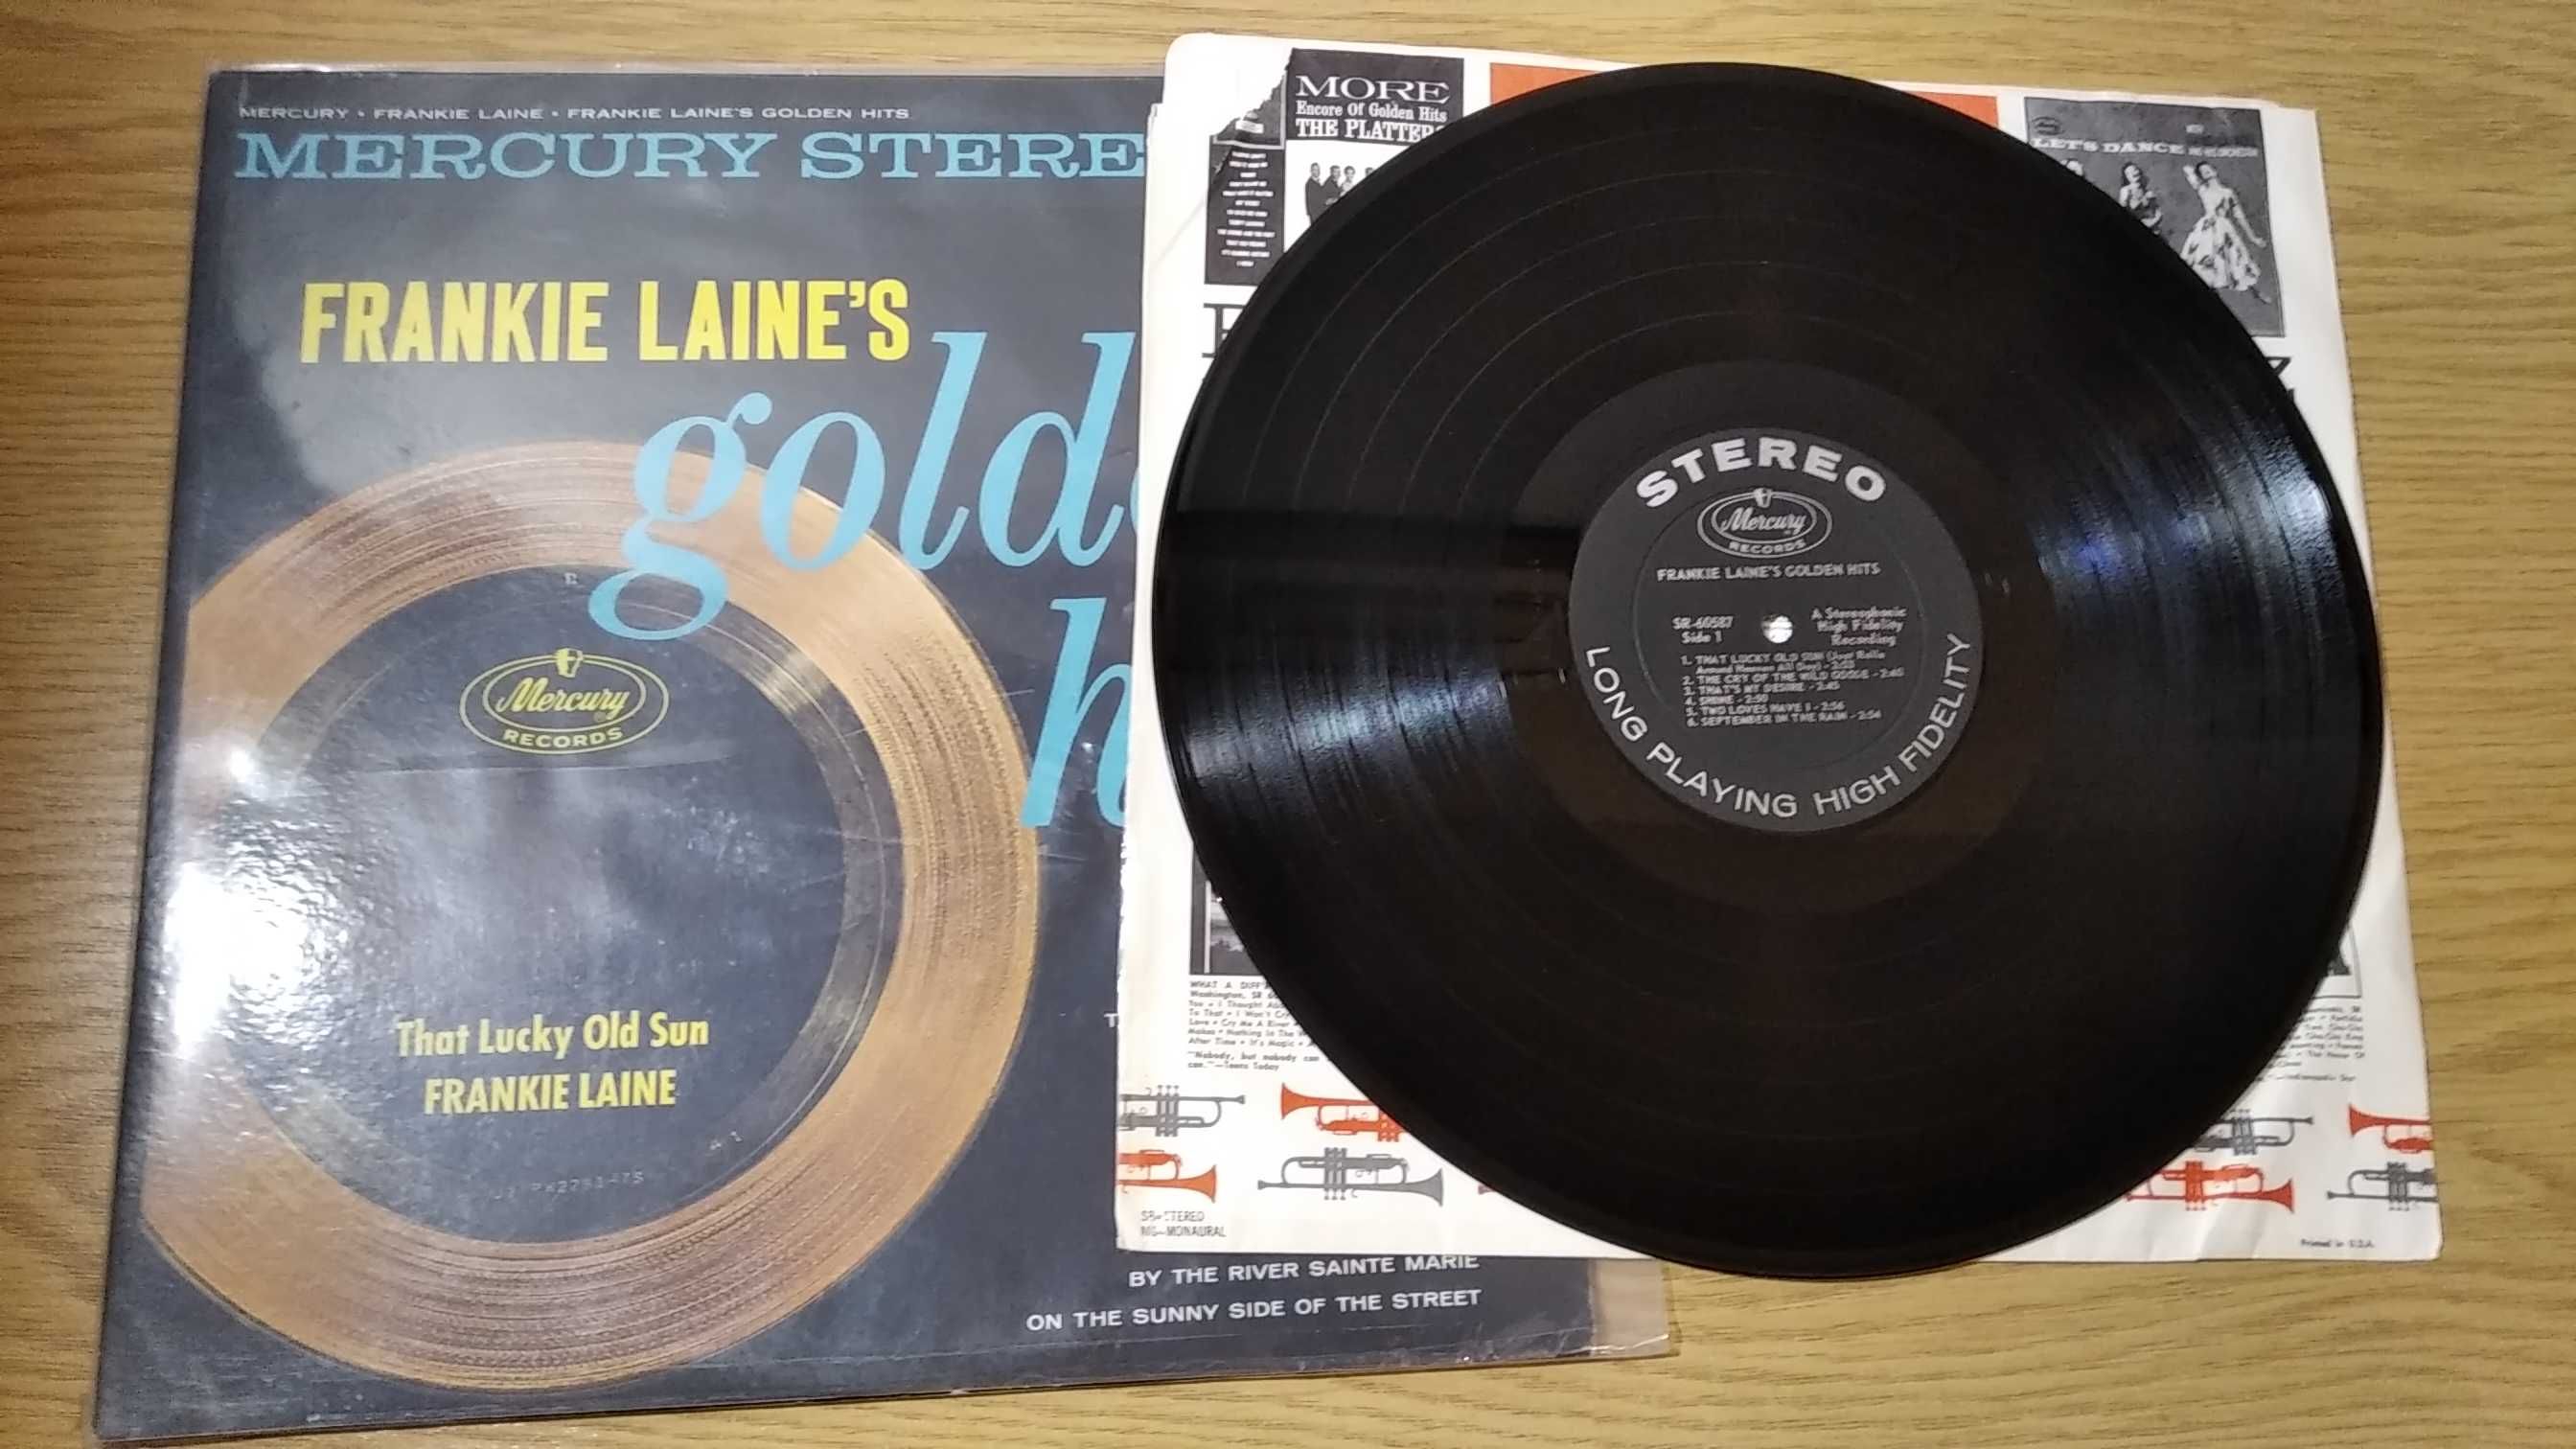 Winyl Frankie Laine's Golden Hits "That lucky old sun" EX